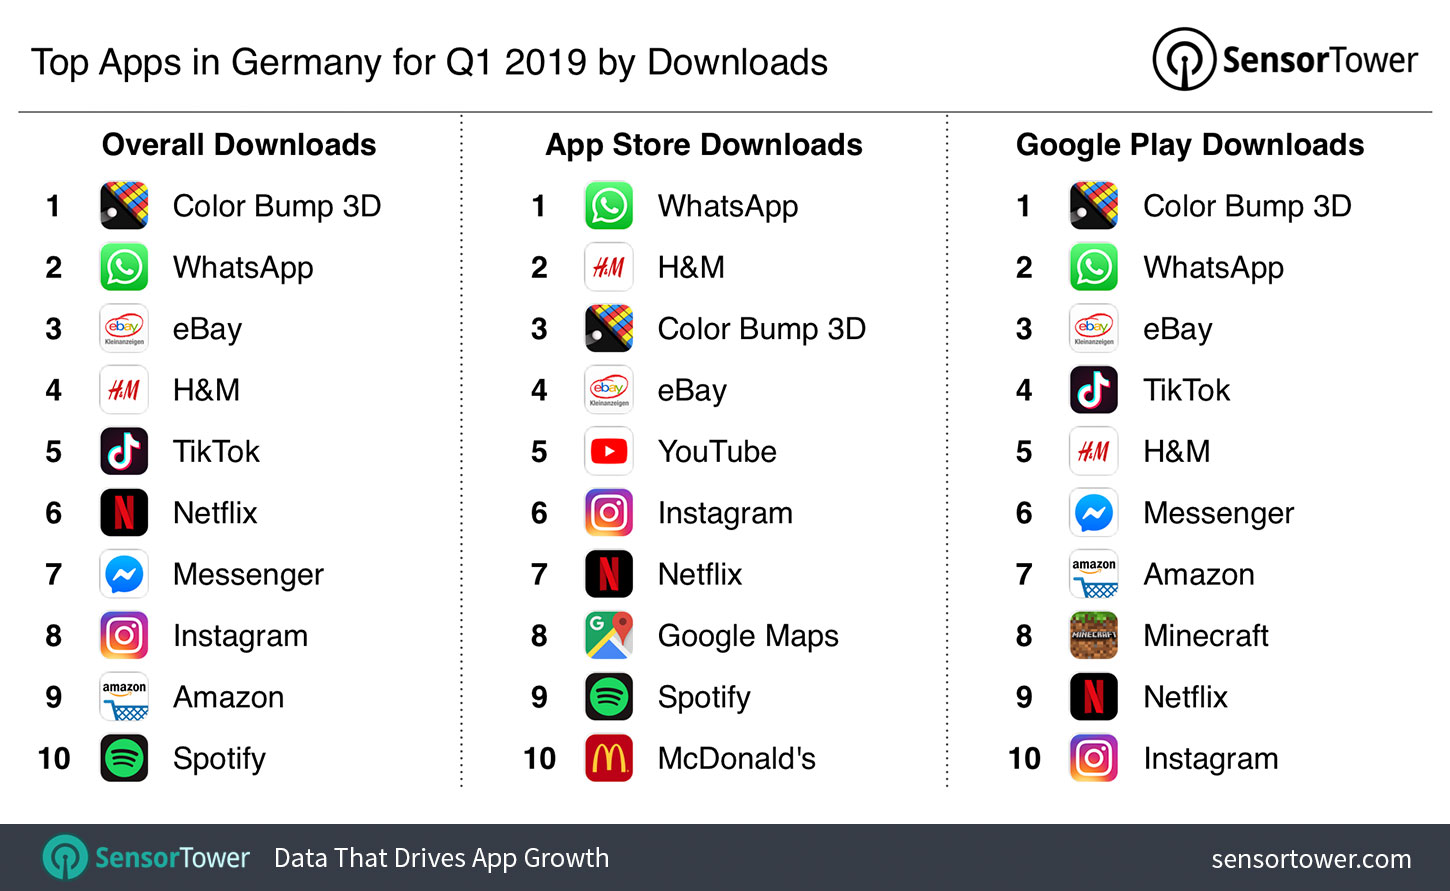 Top Apps in Germany for Q1 2019 by Downloads